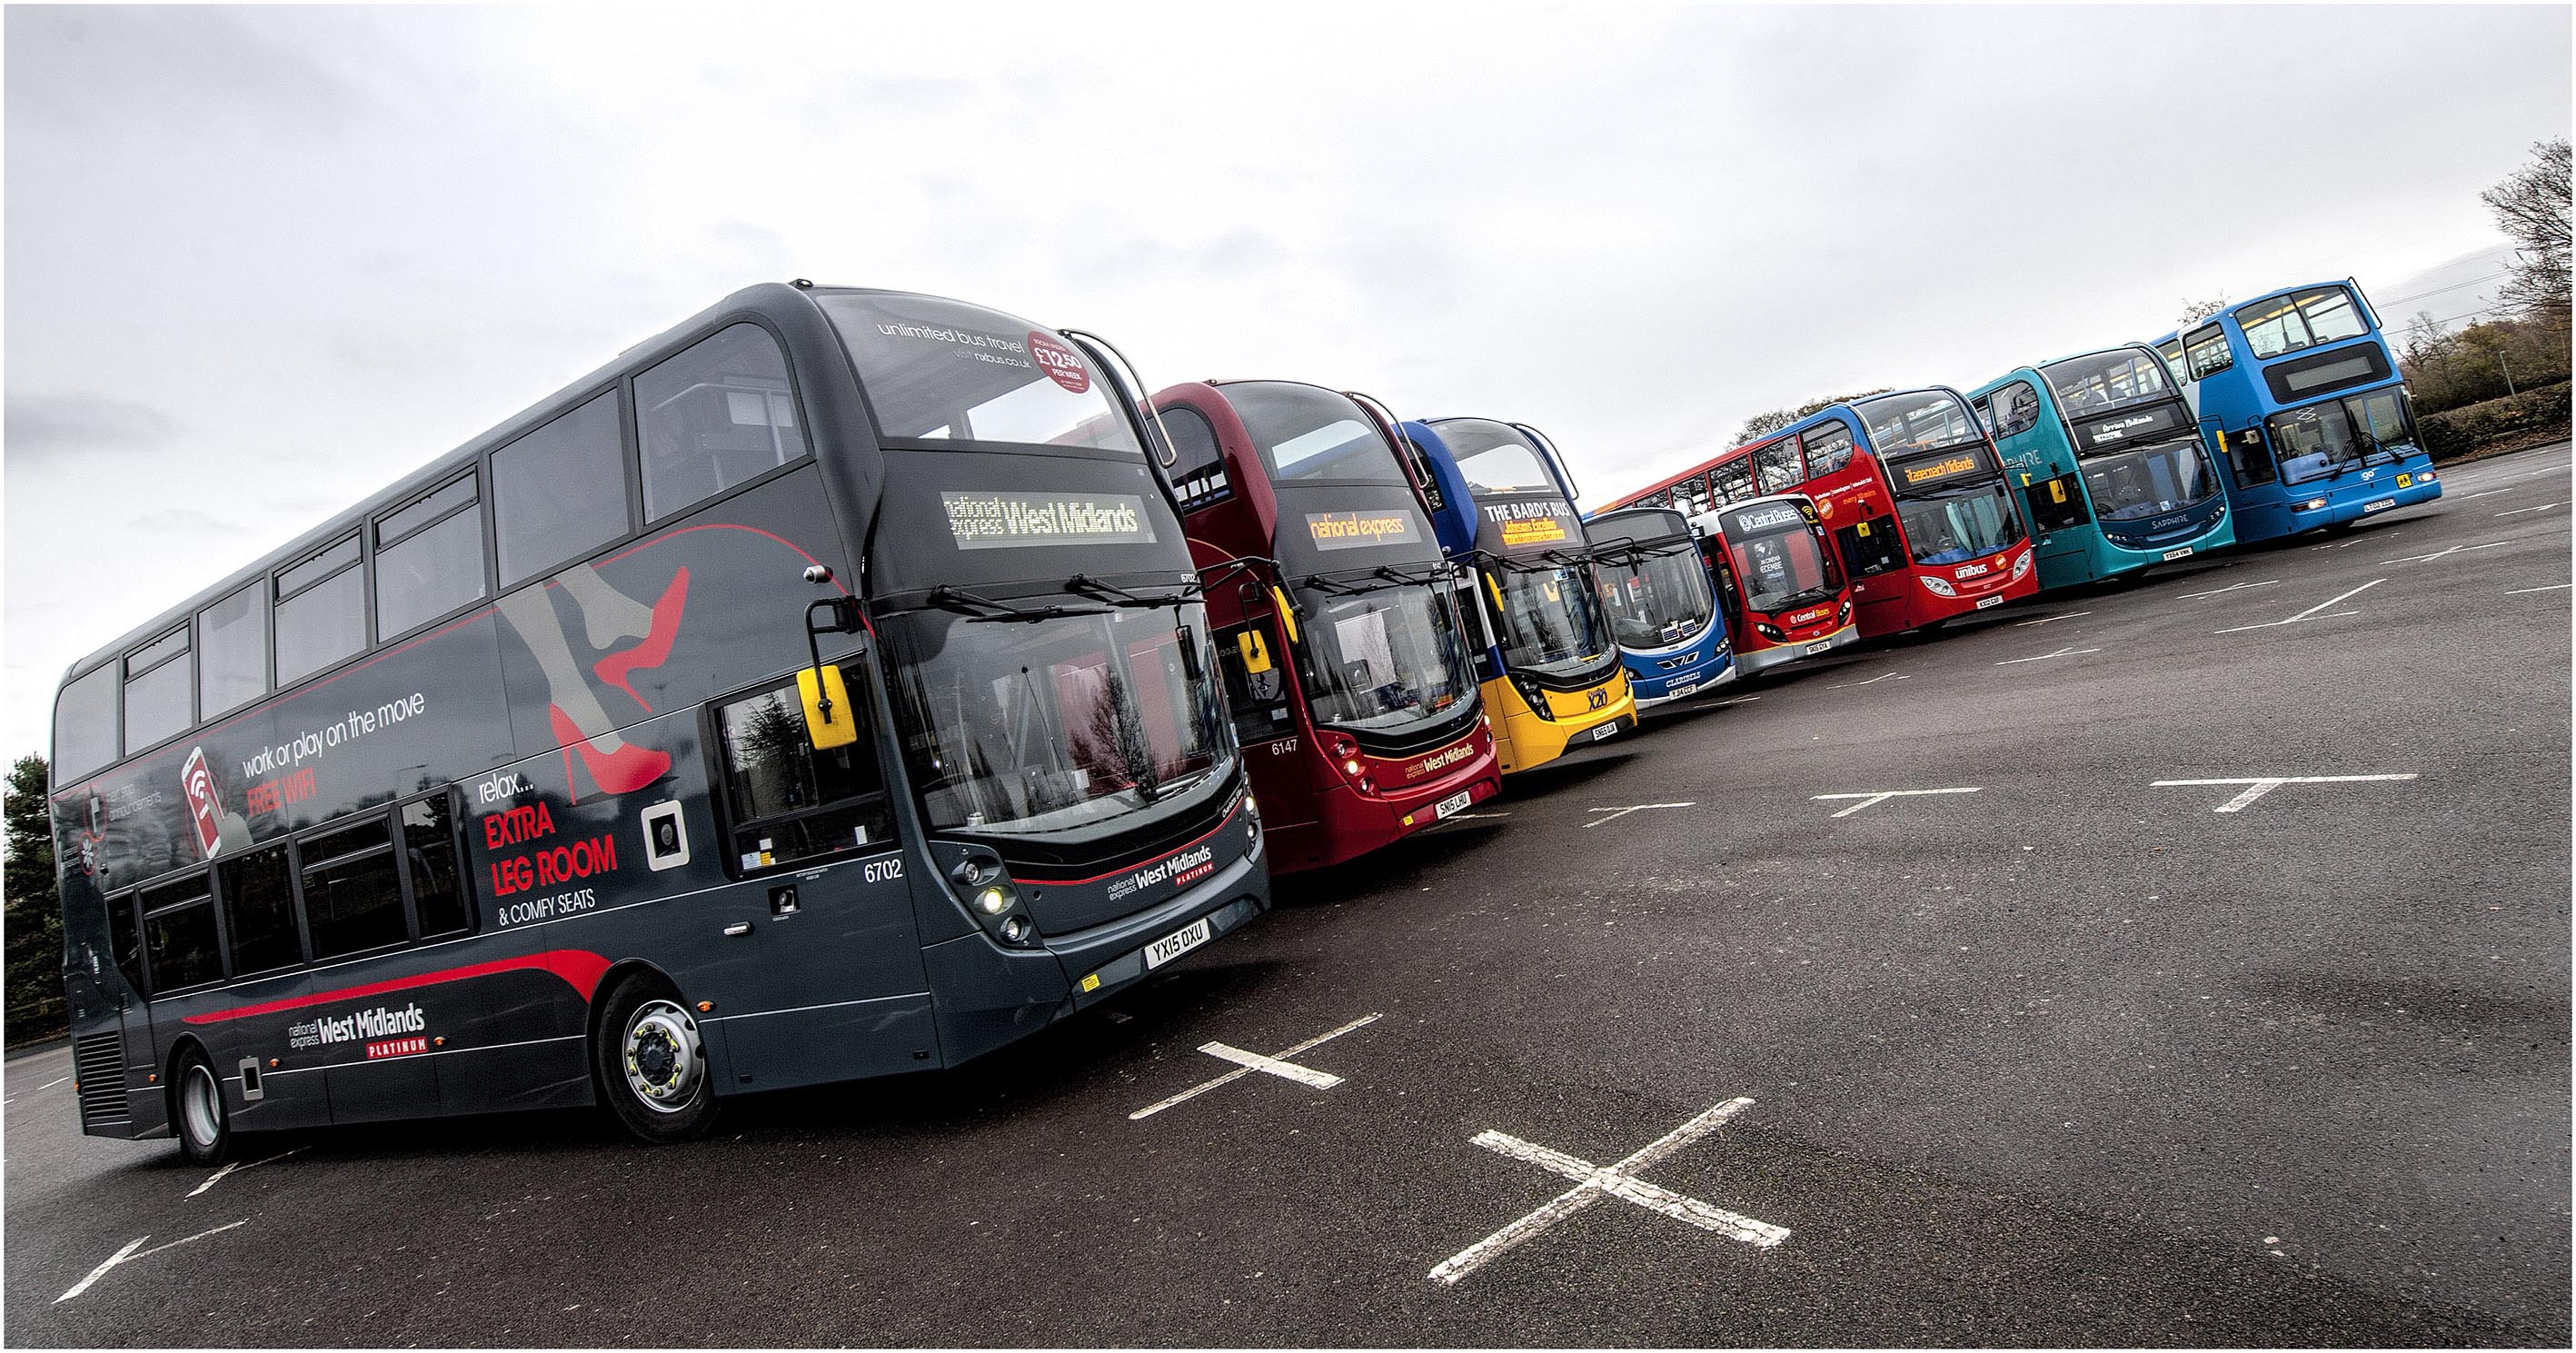 Bus passenger satisfaction across the network on the up, says Transport Focus survey